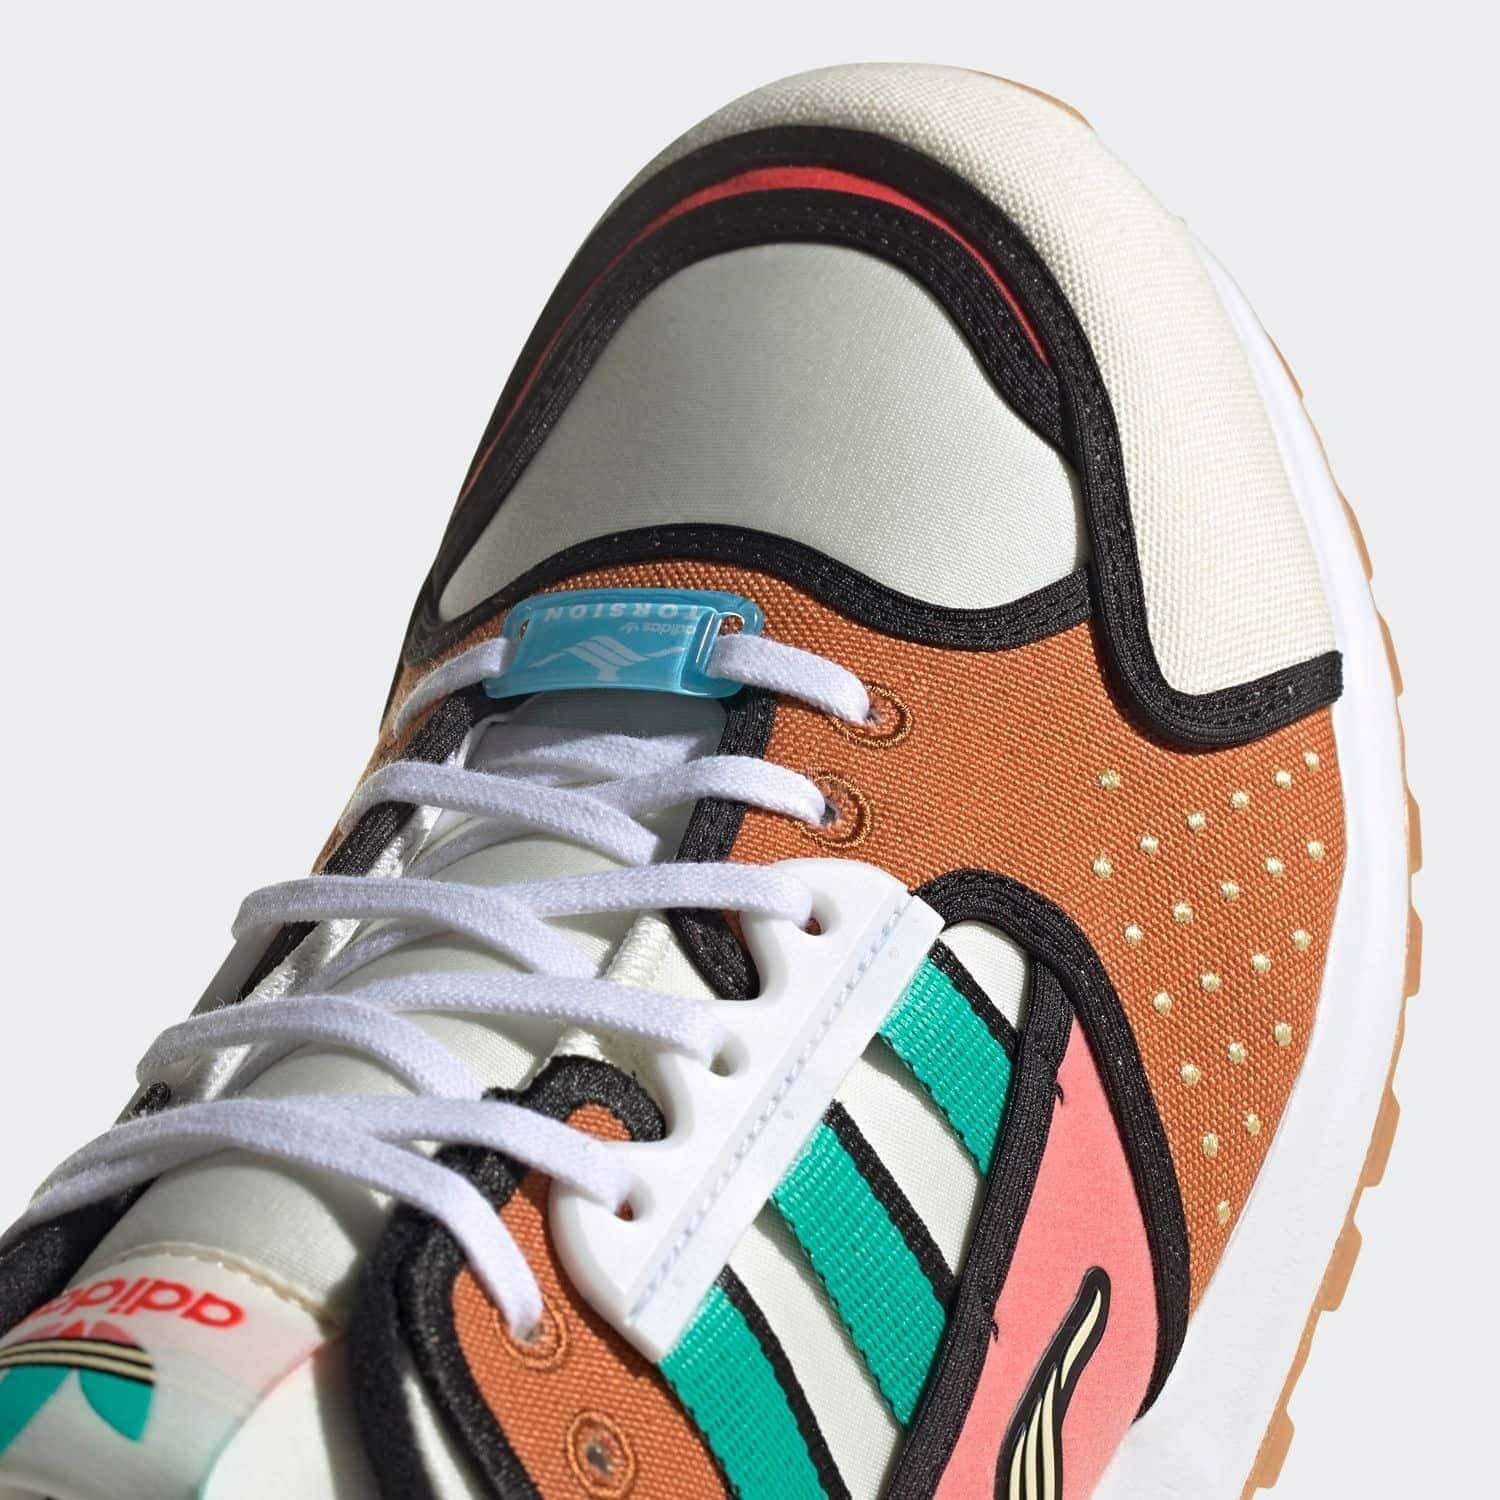 adidas ZX 10000 Krusty Burger The Simpsons (A-ZX Series 2021) H05783 8